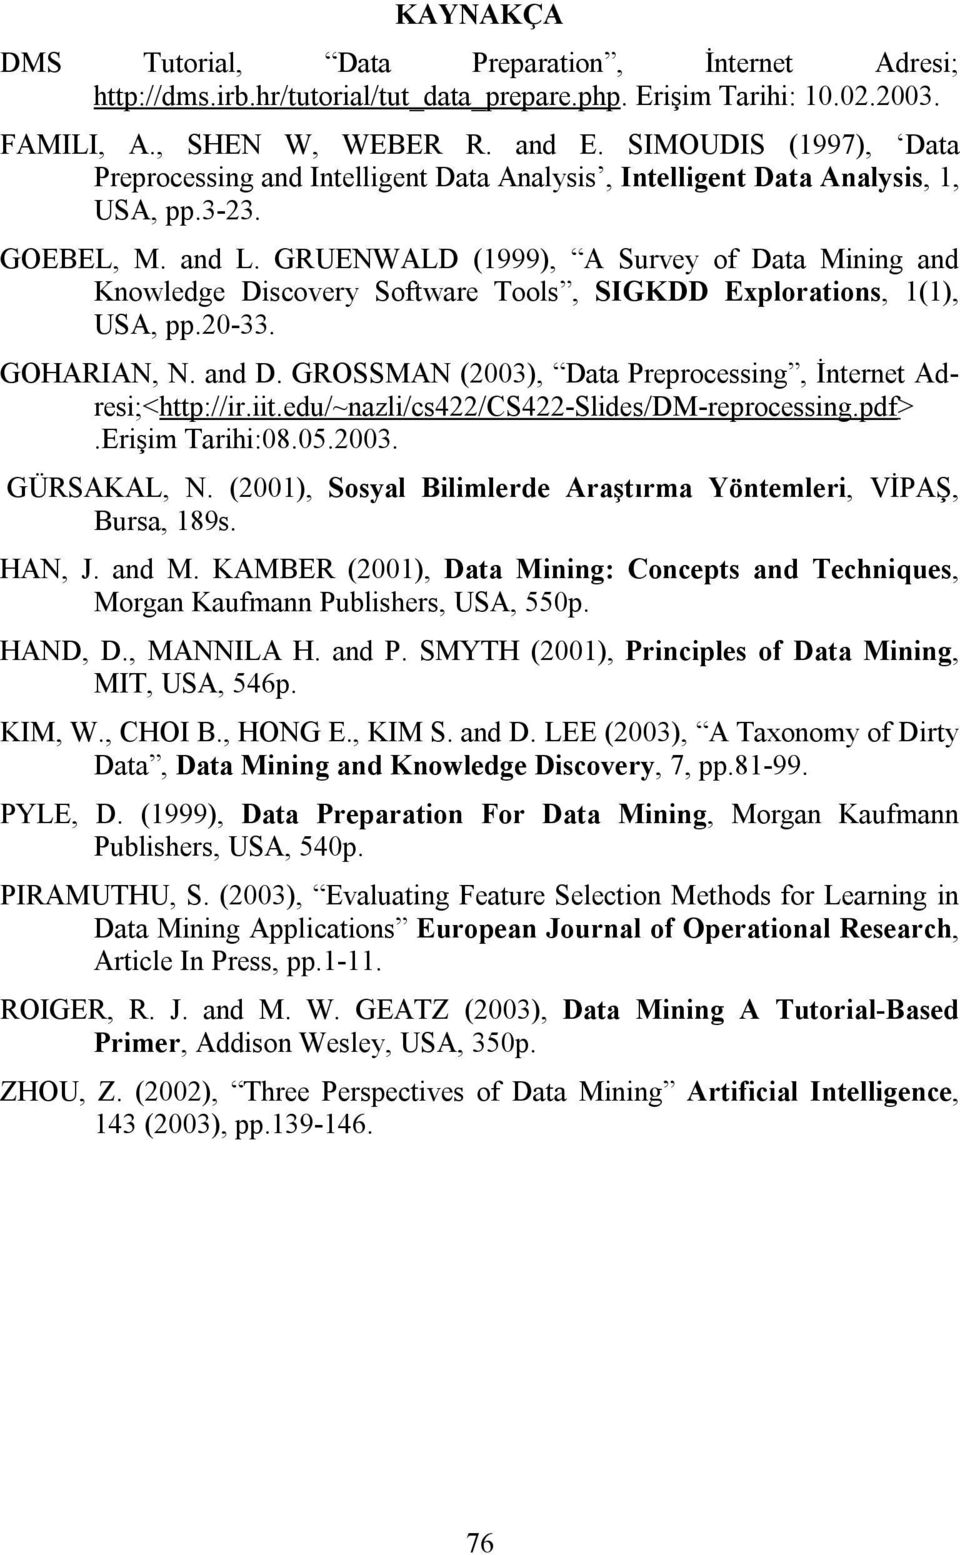 GRUENWALD (1999), A Survey of Data Mining and Knowledge Discovery Software Tools, SIGKDD Explorations, 1(1), USA, pp.20-33. GOHARIAN, N. and D.